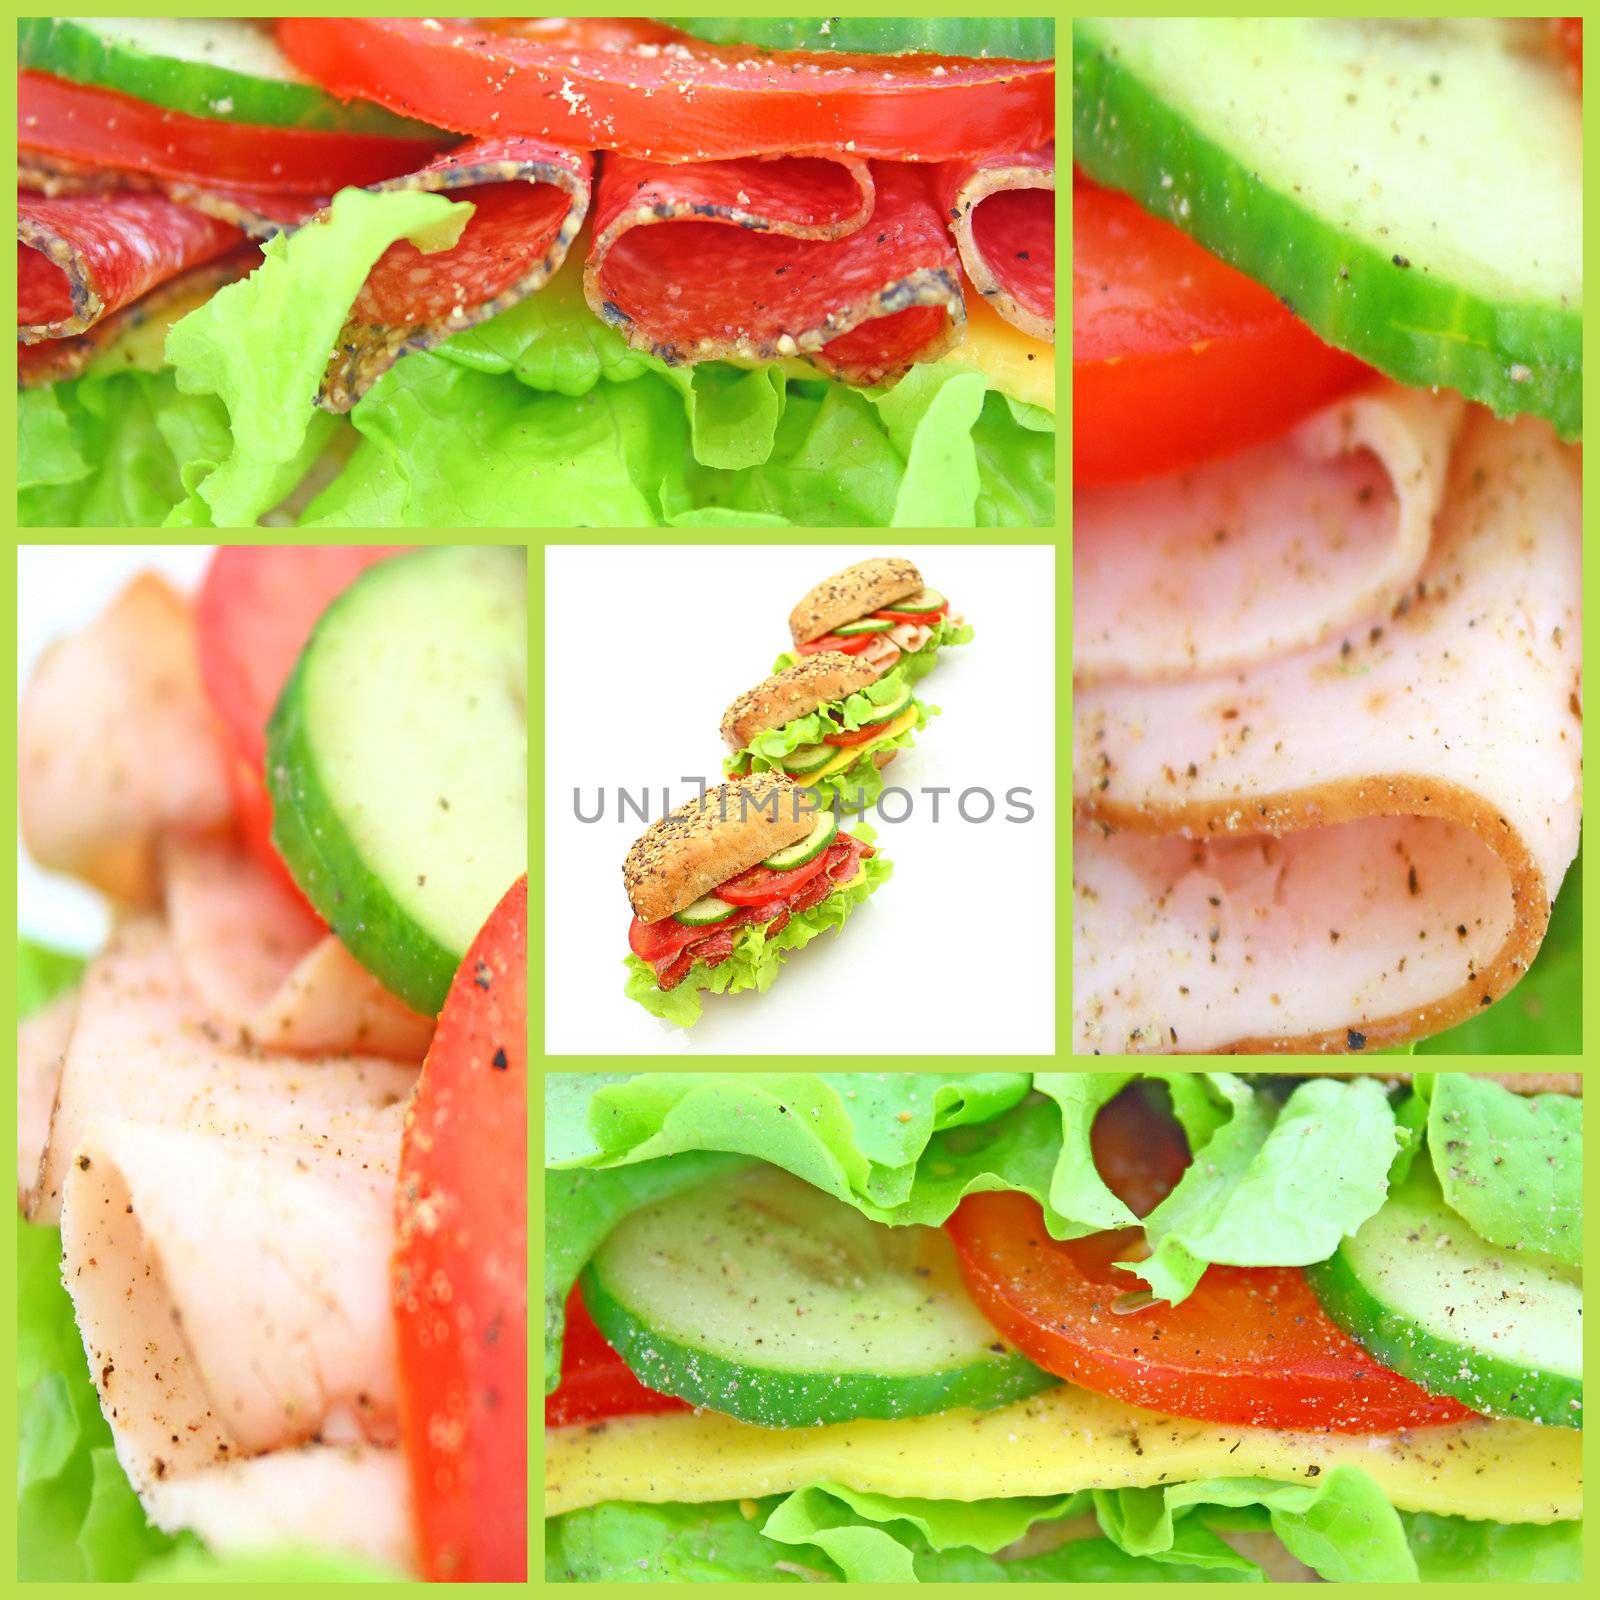 Collage of many different fresh sandwichs by juweber